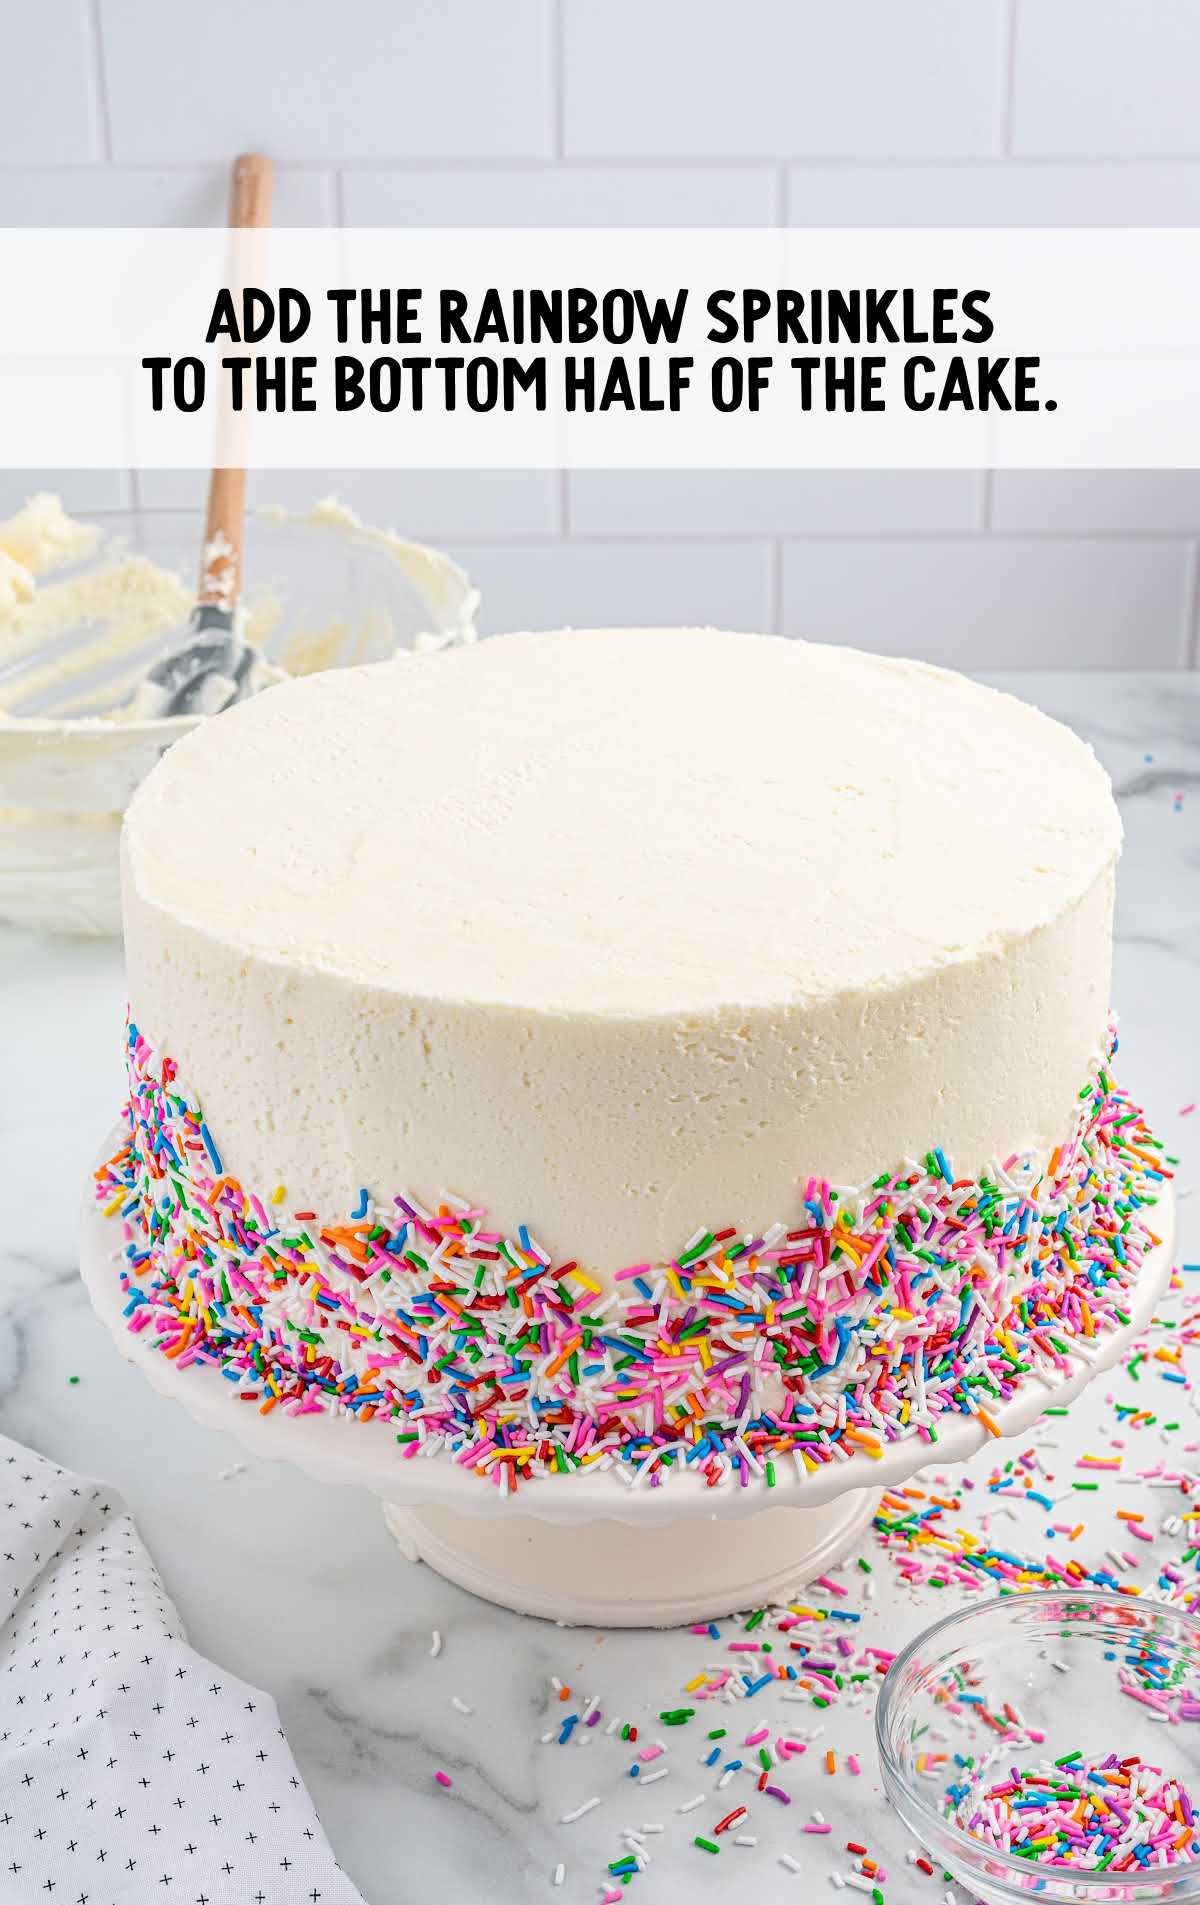 rainbow sprinkles sprinkled at the bottom of the cake